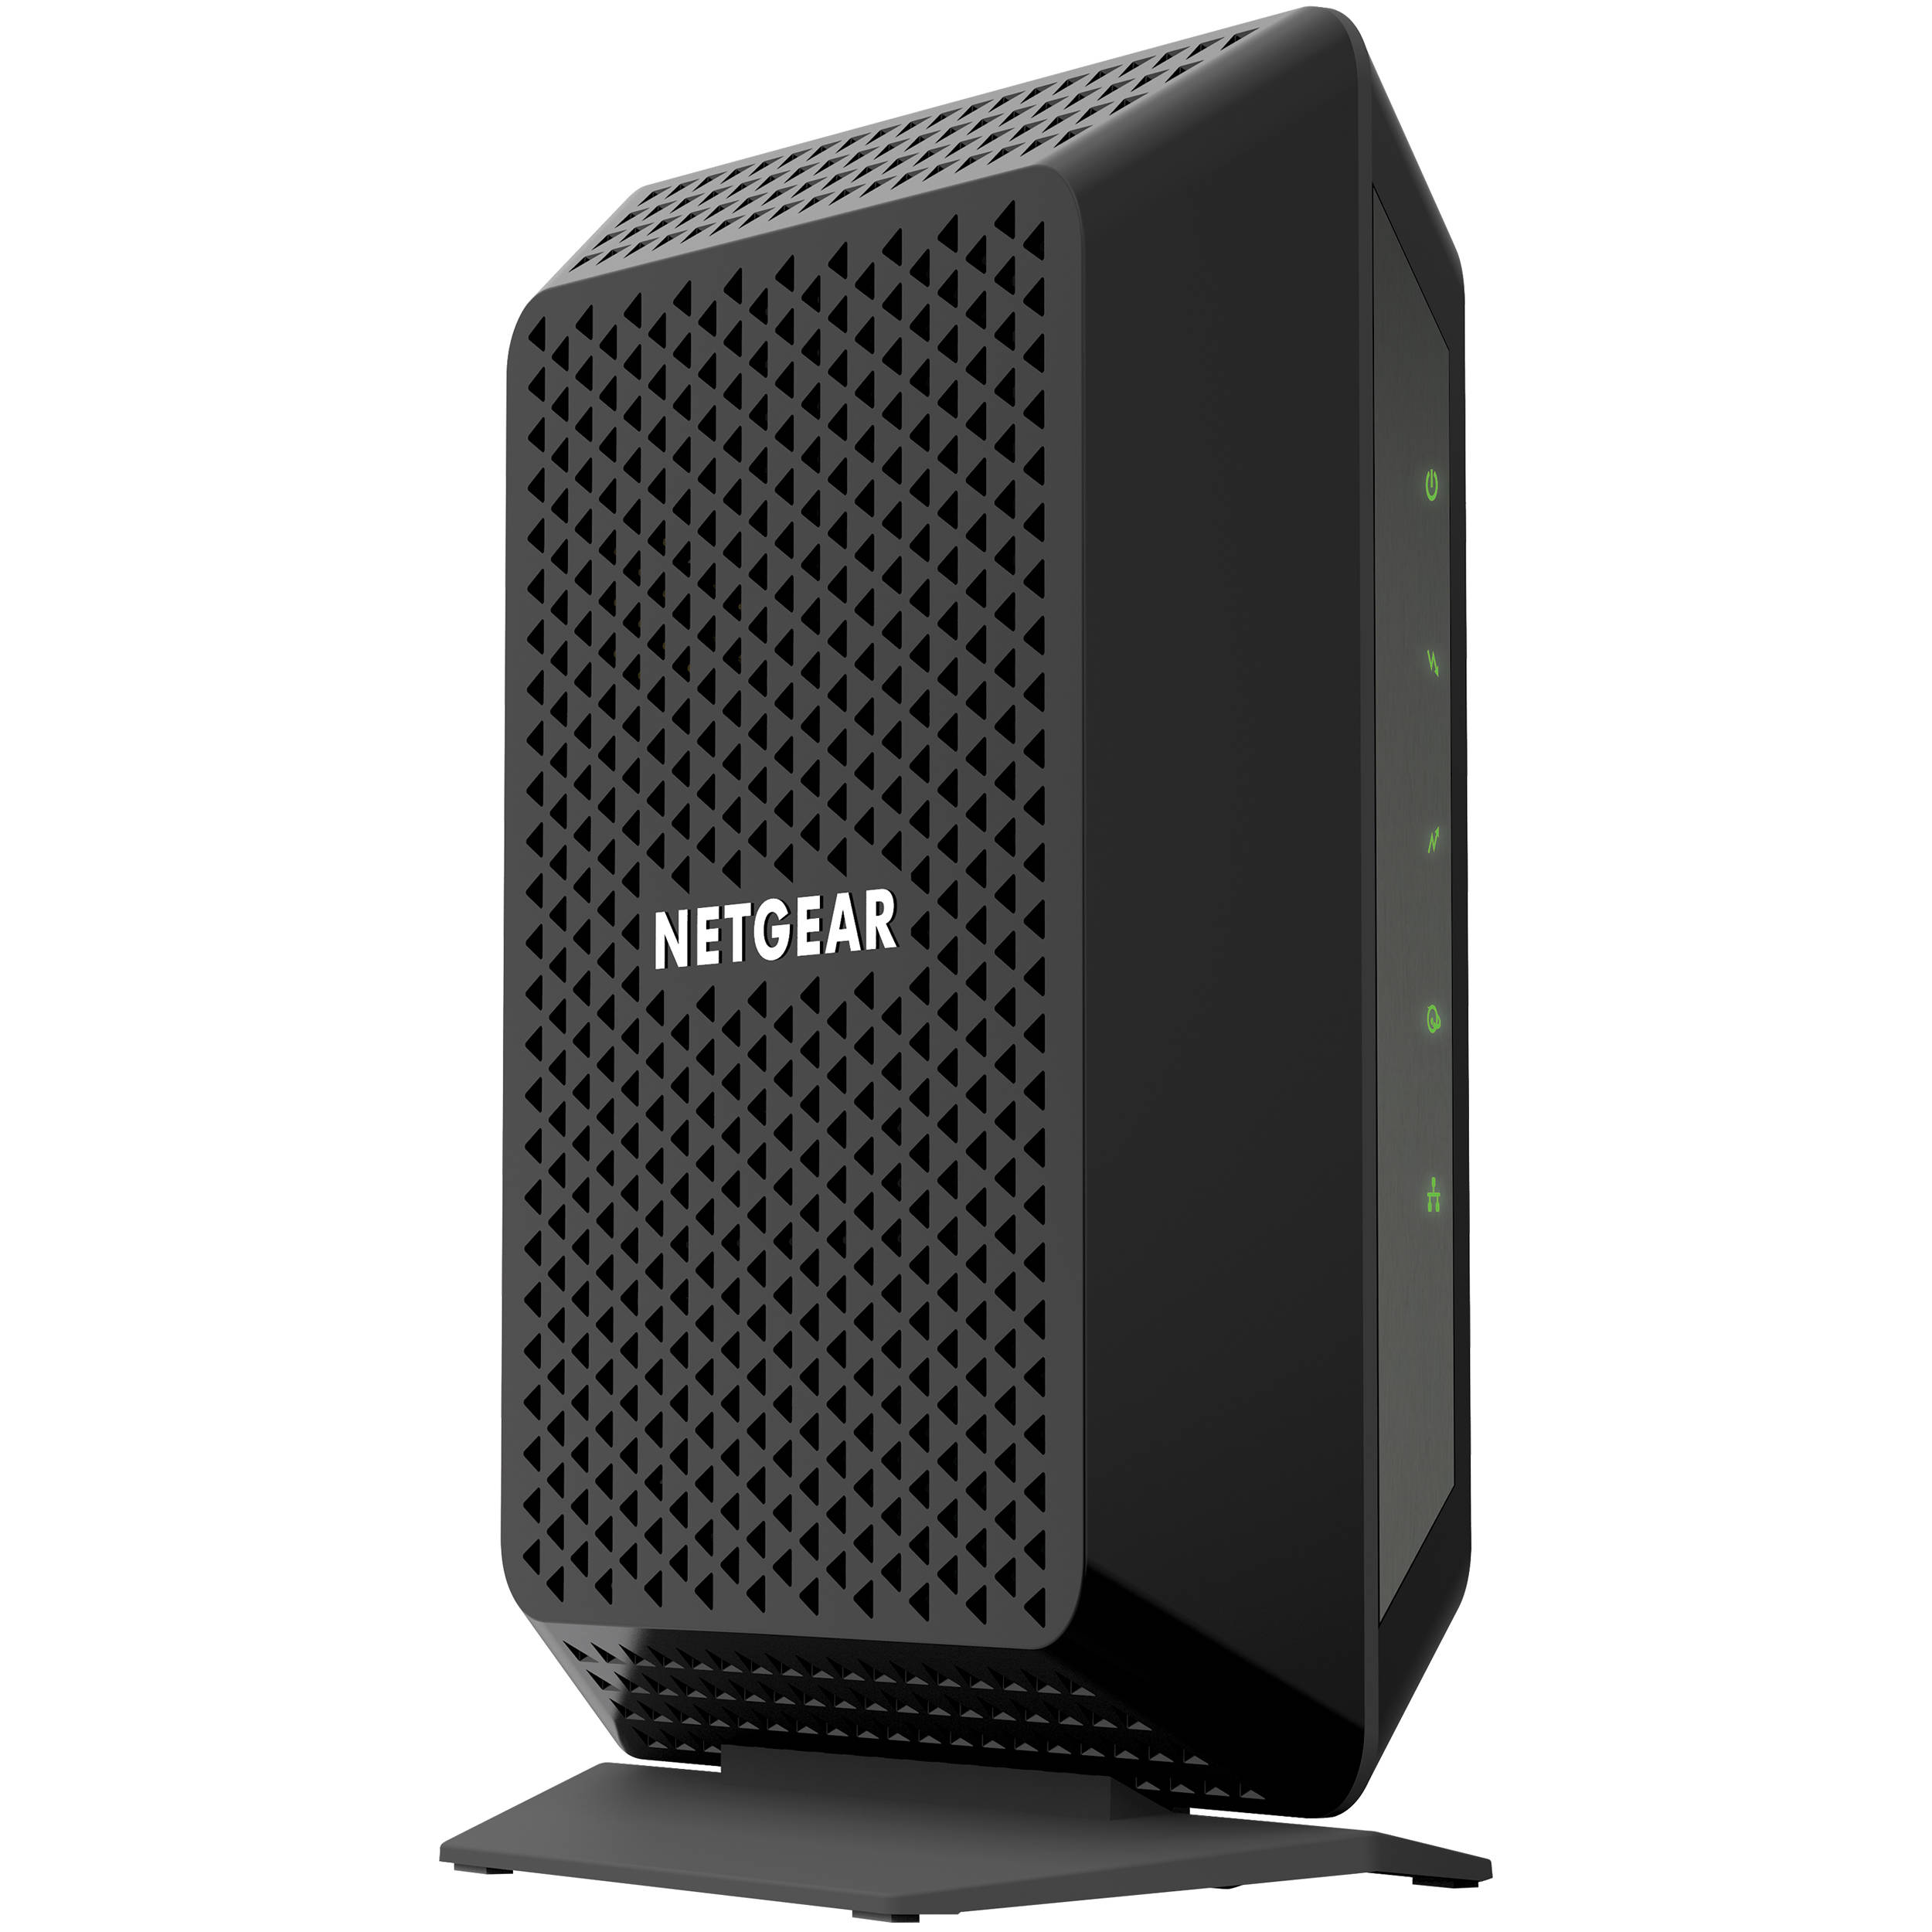 NETGEAR CM700-100NAR High Speed DOCSIS 3.0 Cable Modem - Certified Refurbished